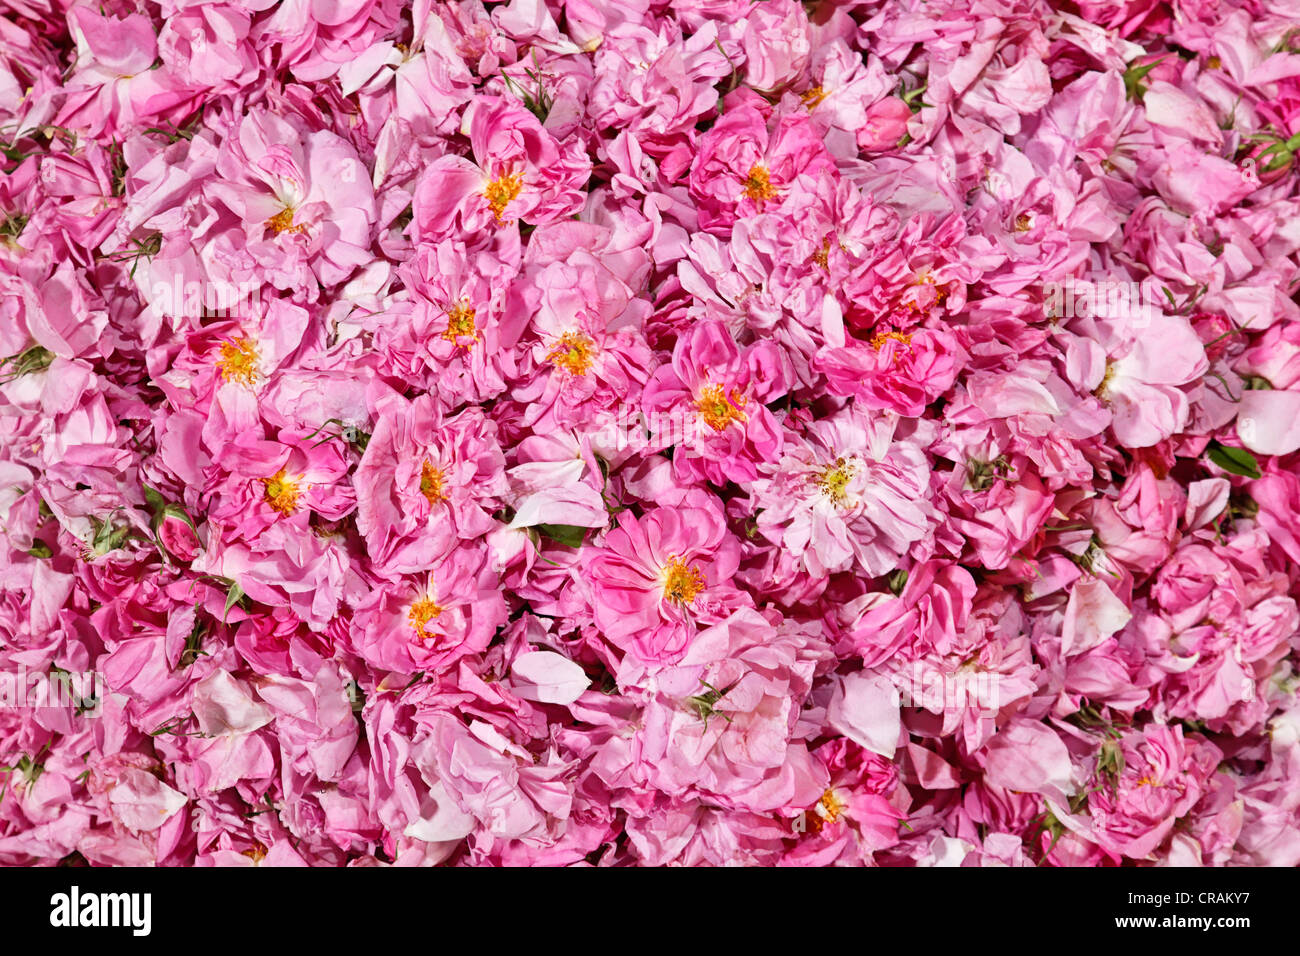 Fresh picked blossoms of organically grown Damask Roses (Rosa damascena) at a collection point in an oasis in the Valley of Stock Photo